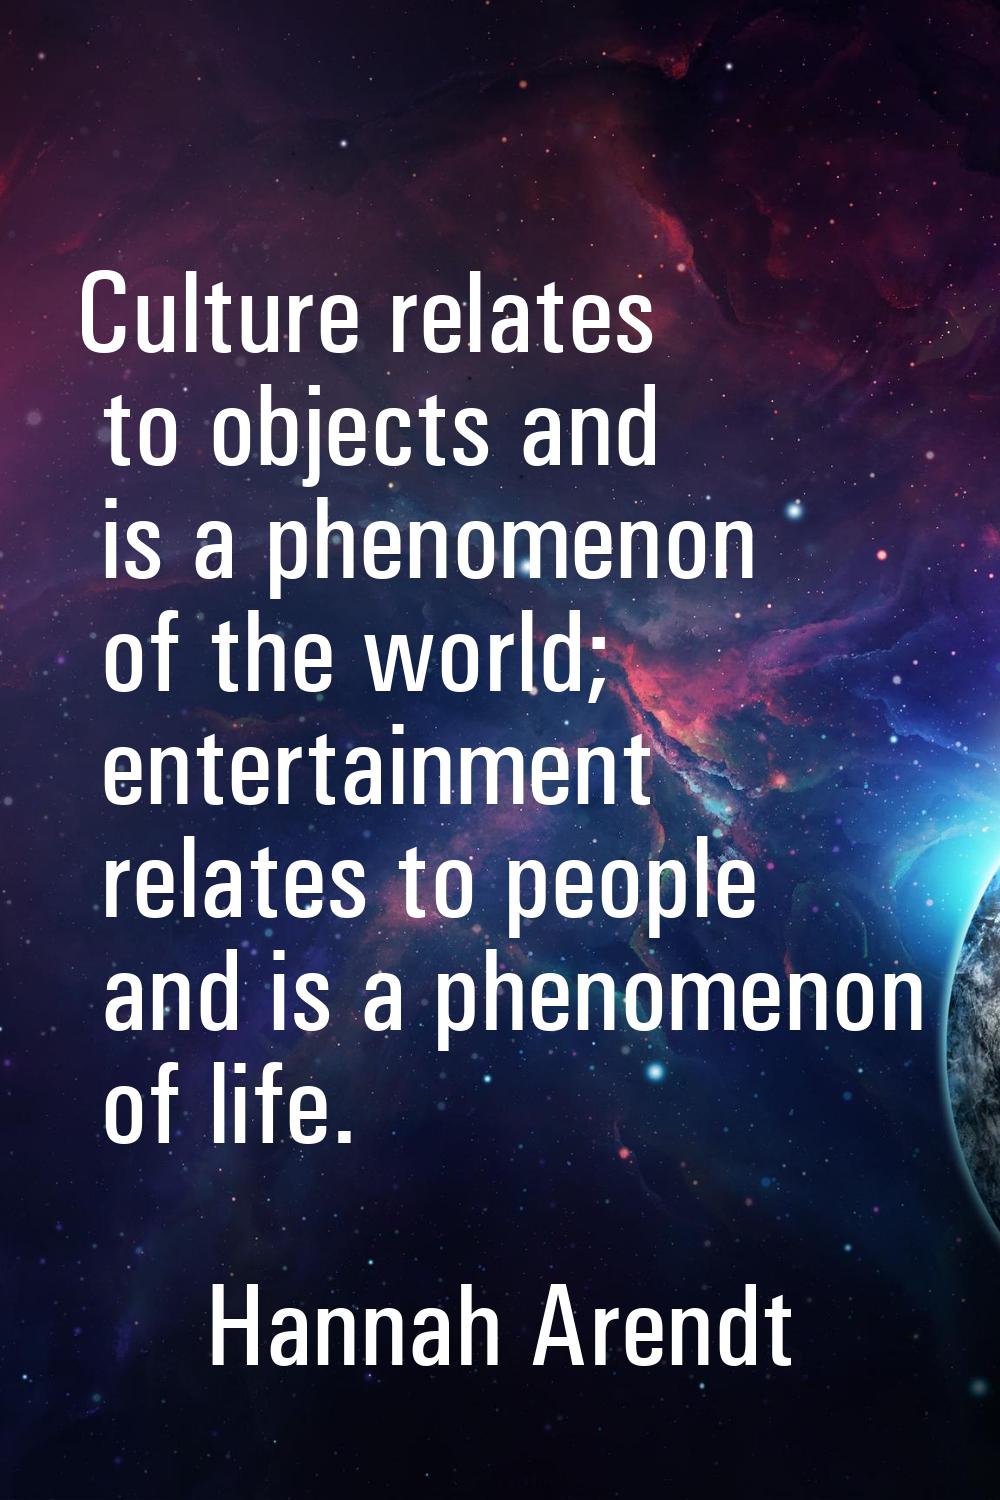 Culture relates to objects and is a phenomenon of the world; entertainment relates to people and is